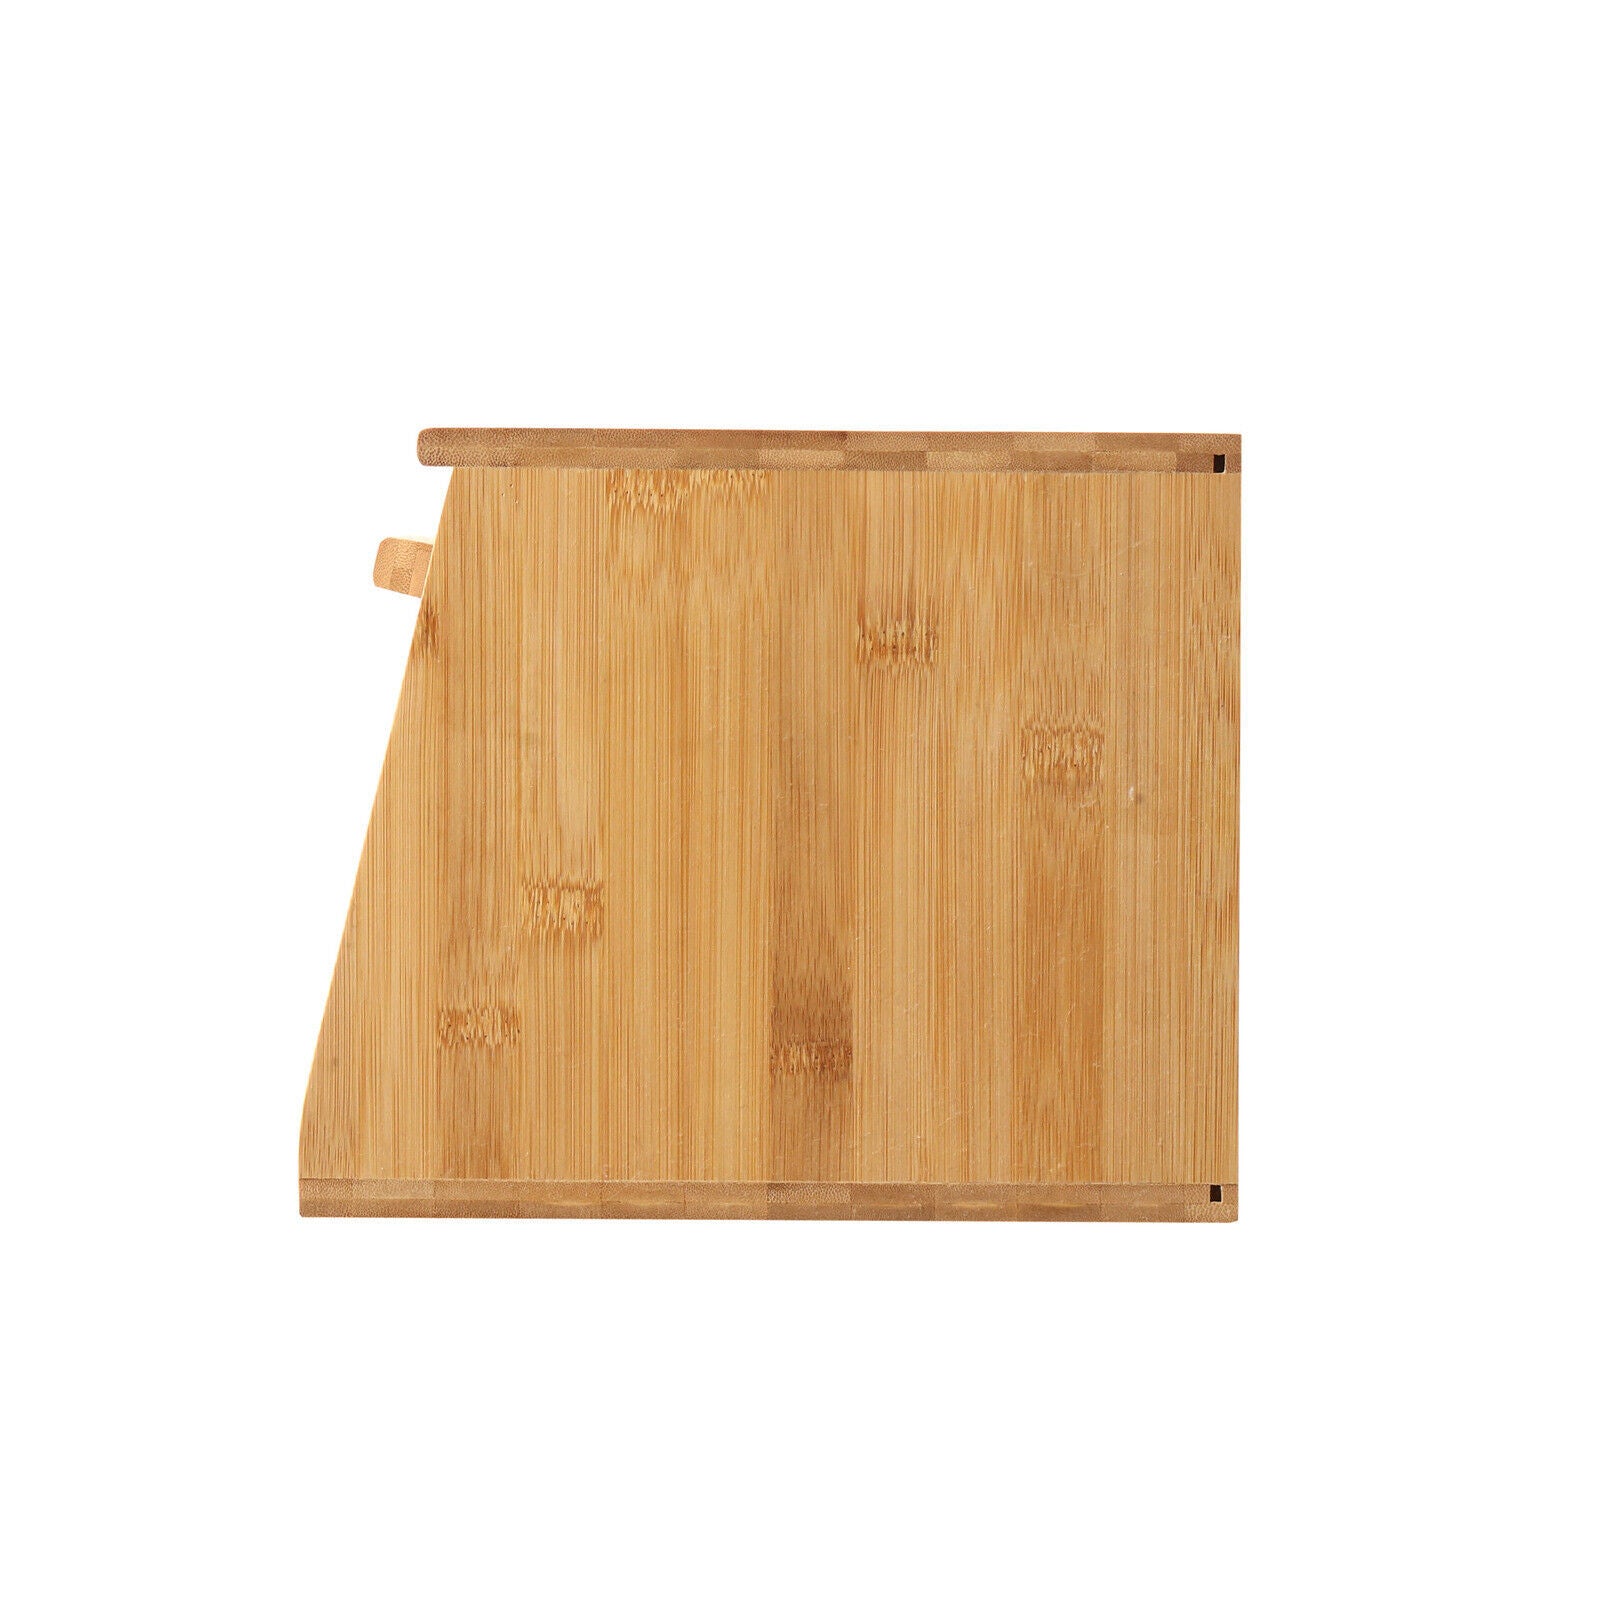 Sherwood Home Bamboo Bread Box With Lid Natural Bamboo